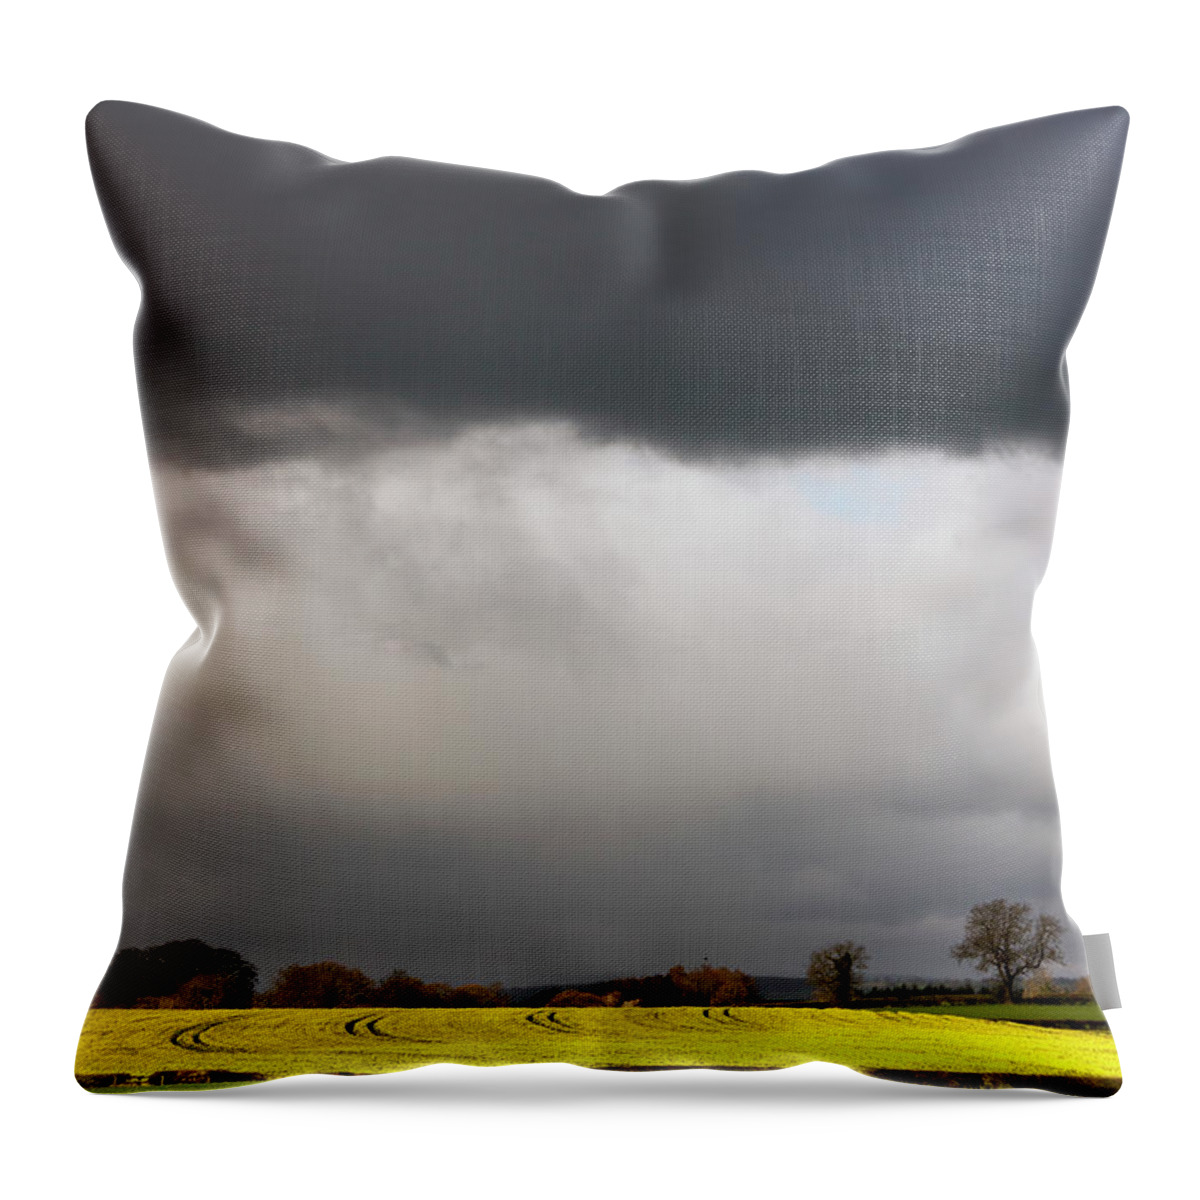 England Throw Pillow featuring the photograph Dark Storm Clouds Over Farmland by John Short / Design Pics